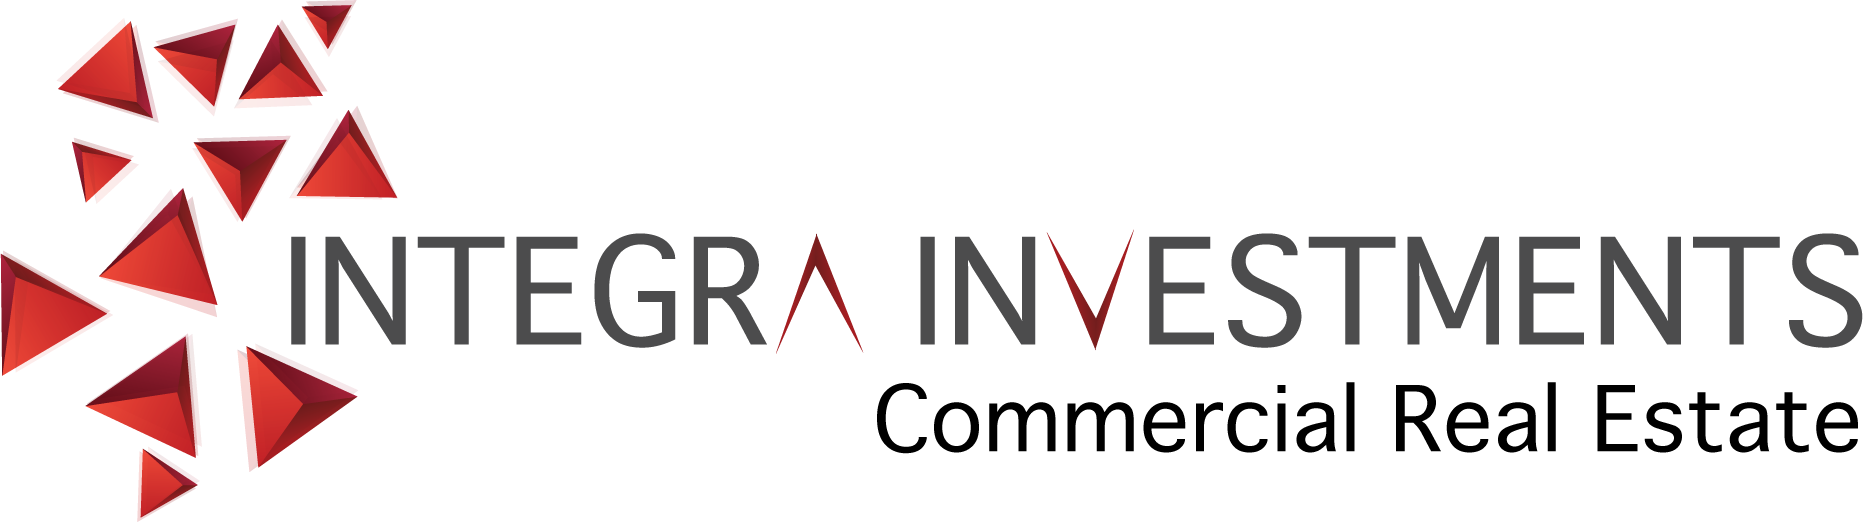 Integra Real Estate Investments